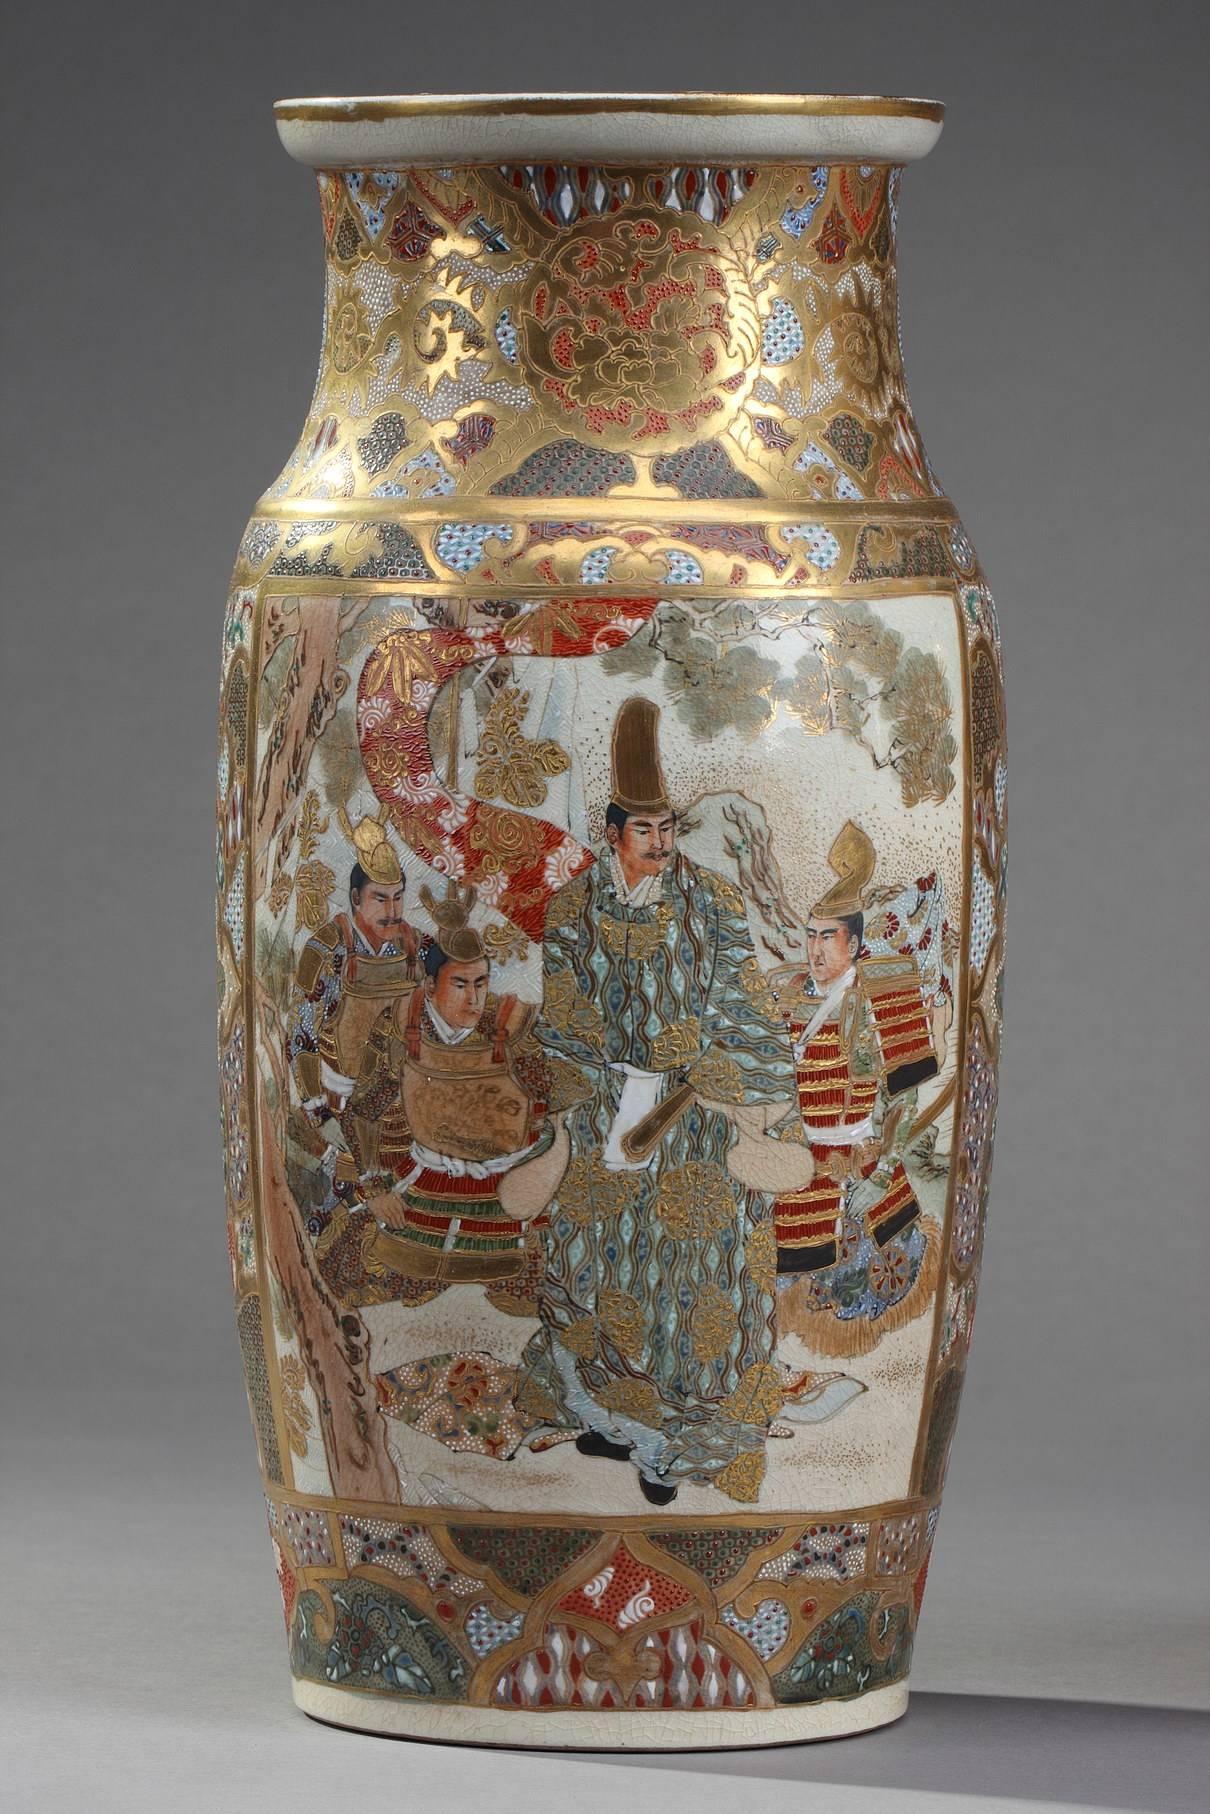 Pair of baluster-shaped vases painted in polychrome enamels and gold. The paunch is decorated with two panels depicting samurai, the reverse with Japanese courtiers, the neck and the shoulder with stylised flowers and other geometric patterns.